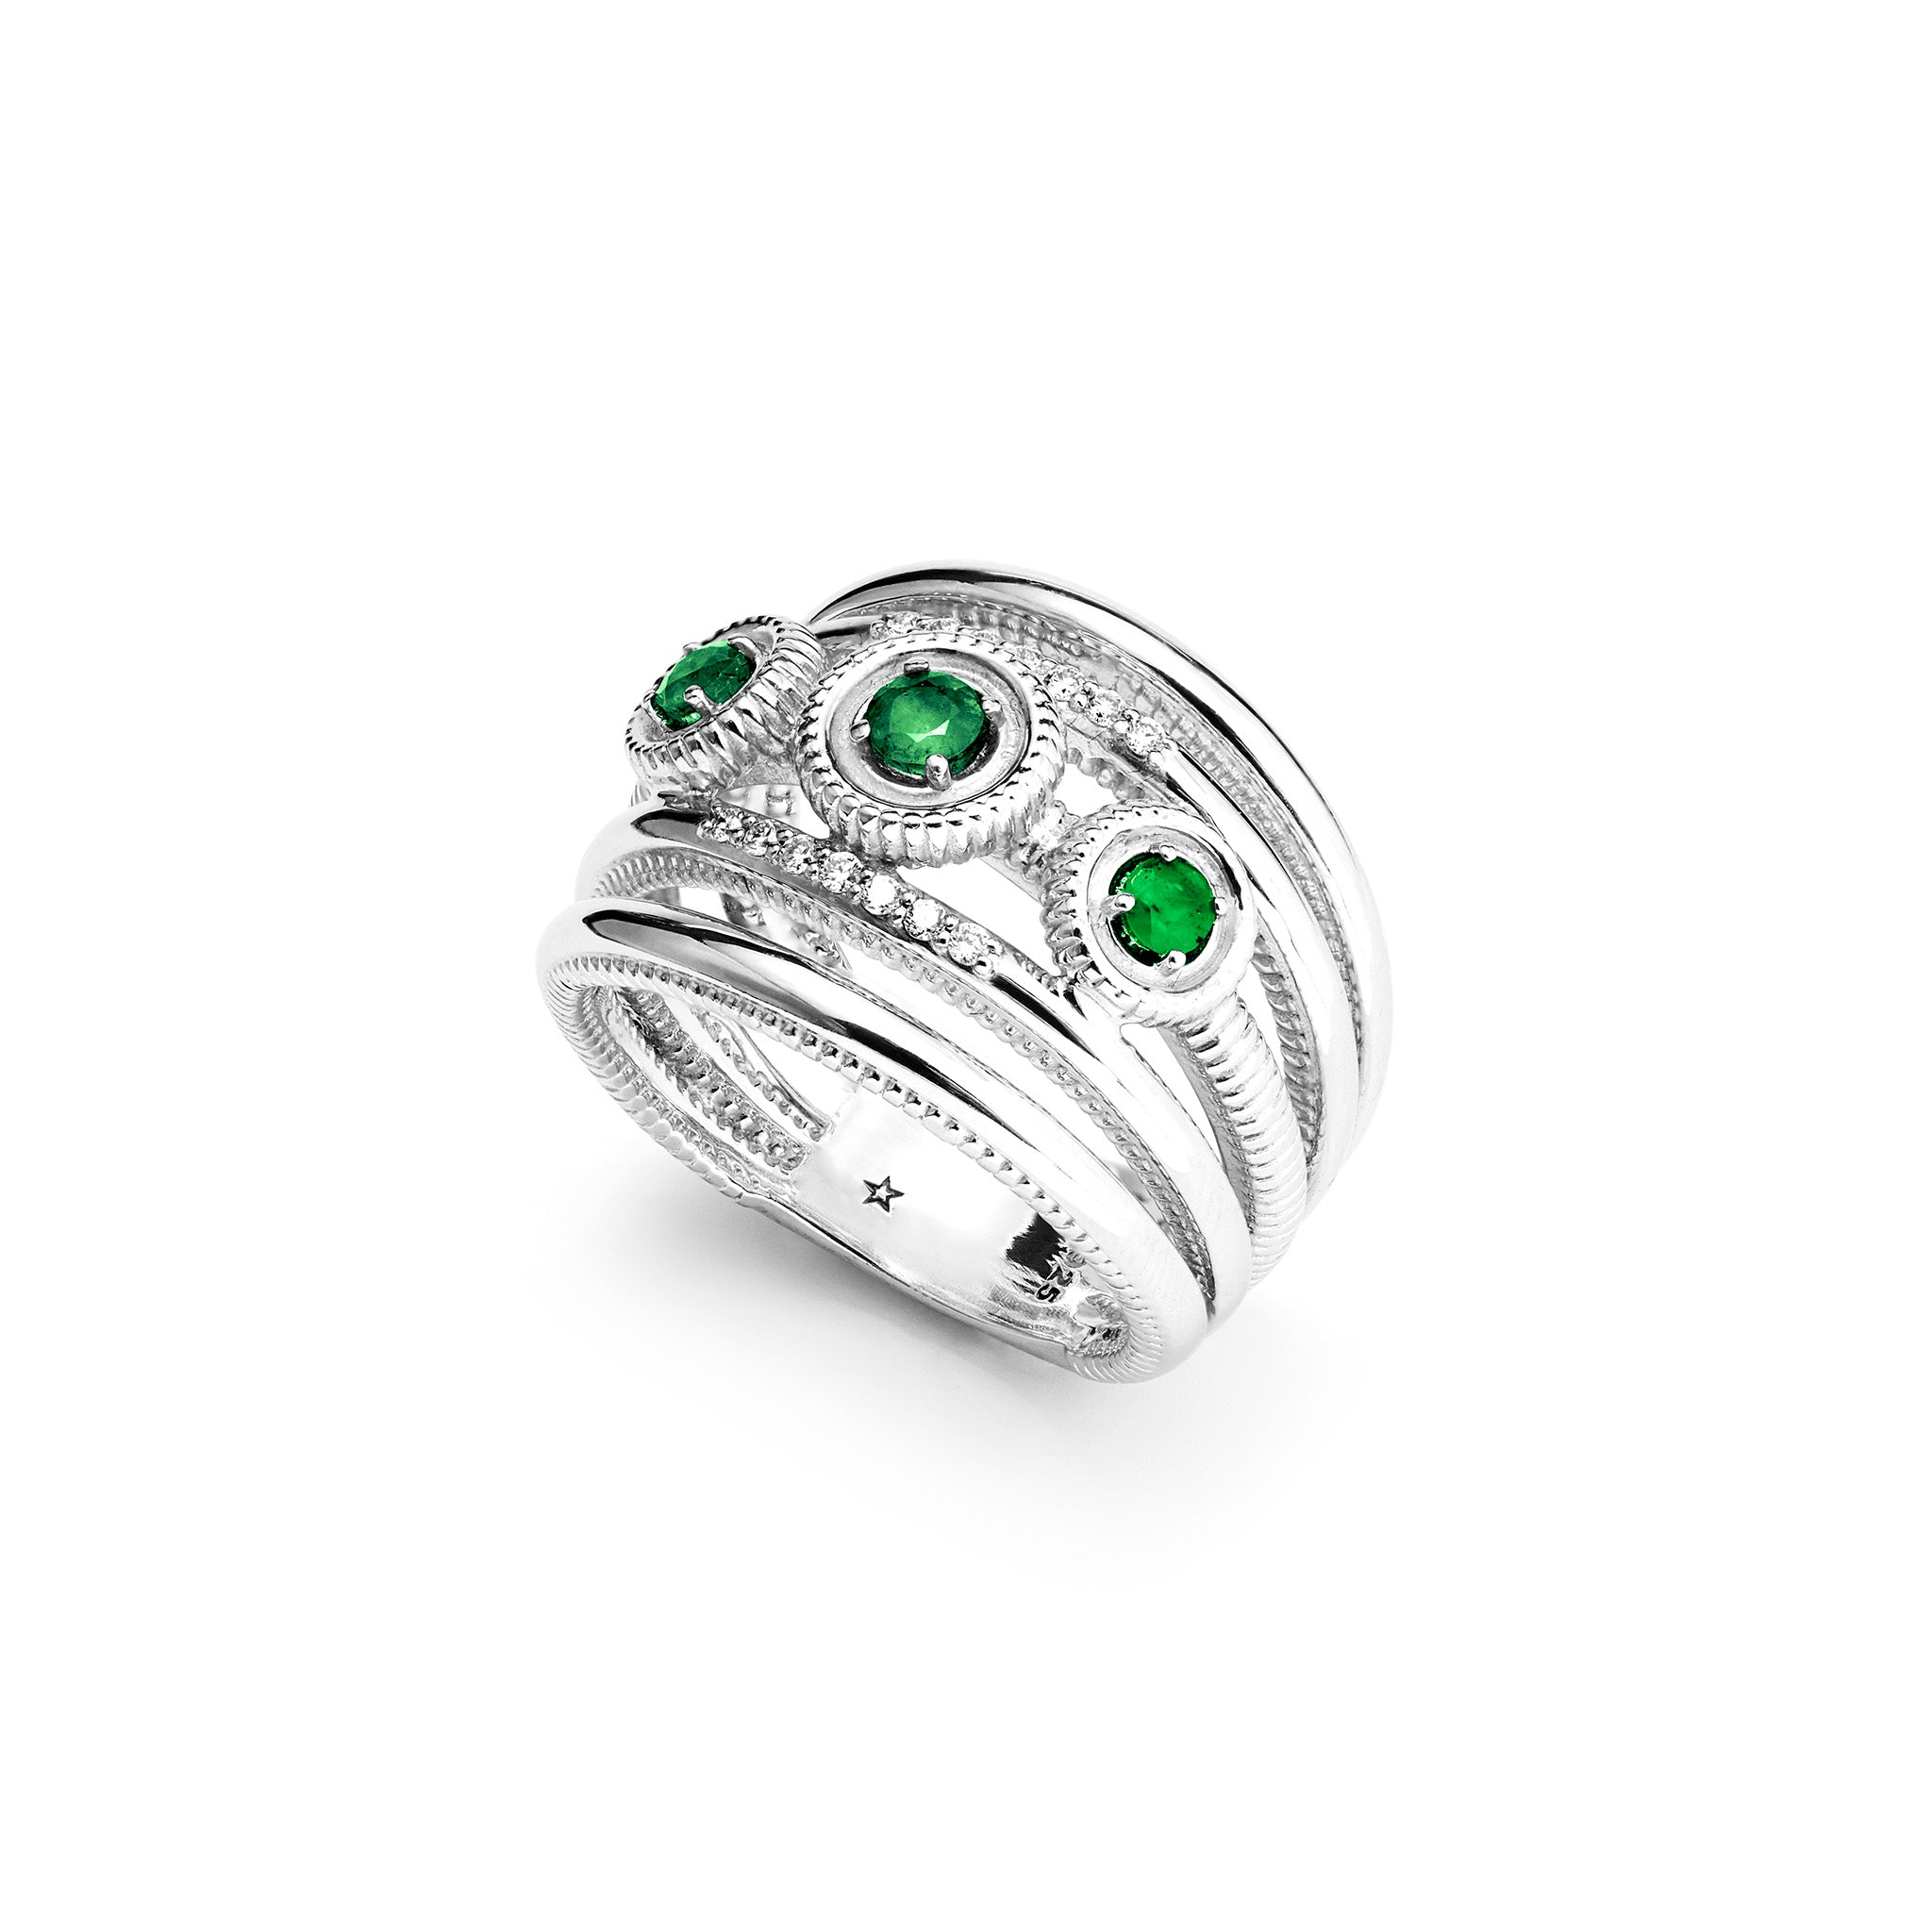 Max Band Ring with Emerald and Diamonds